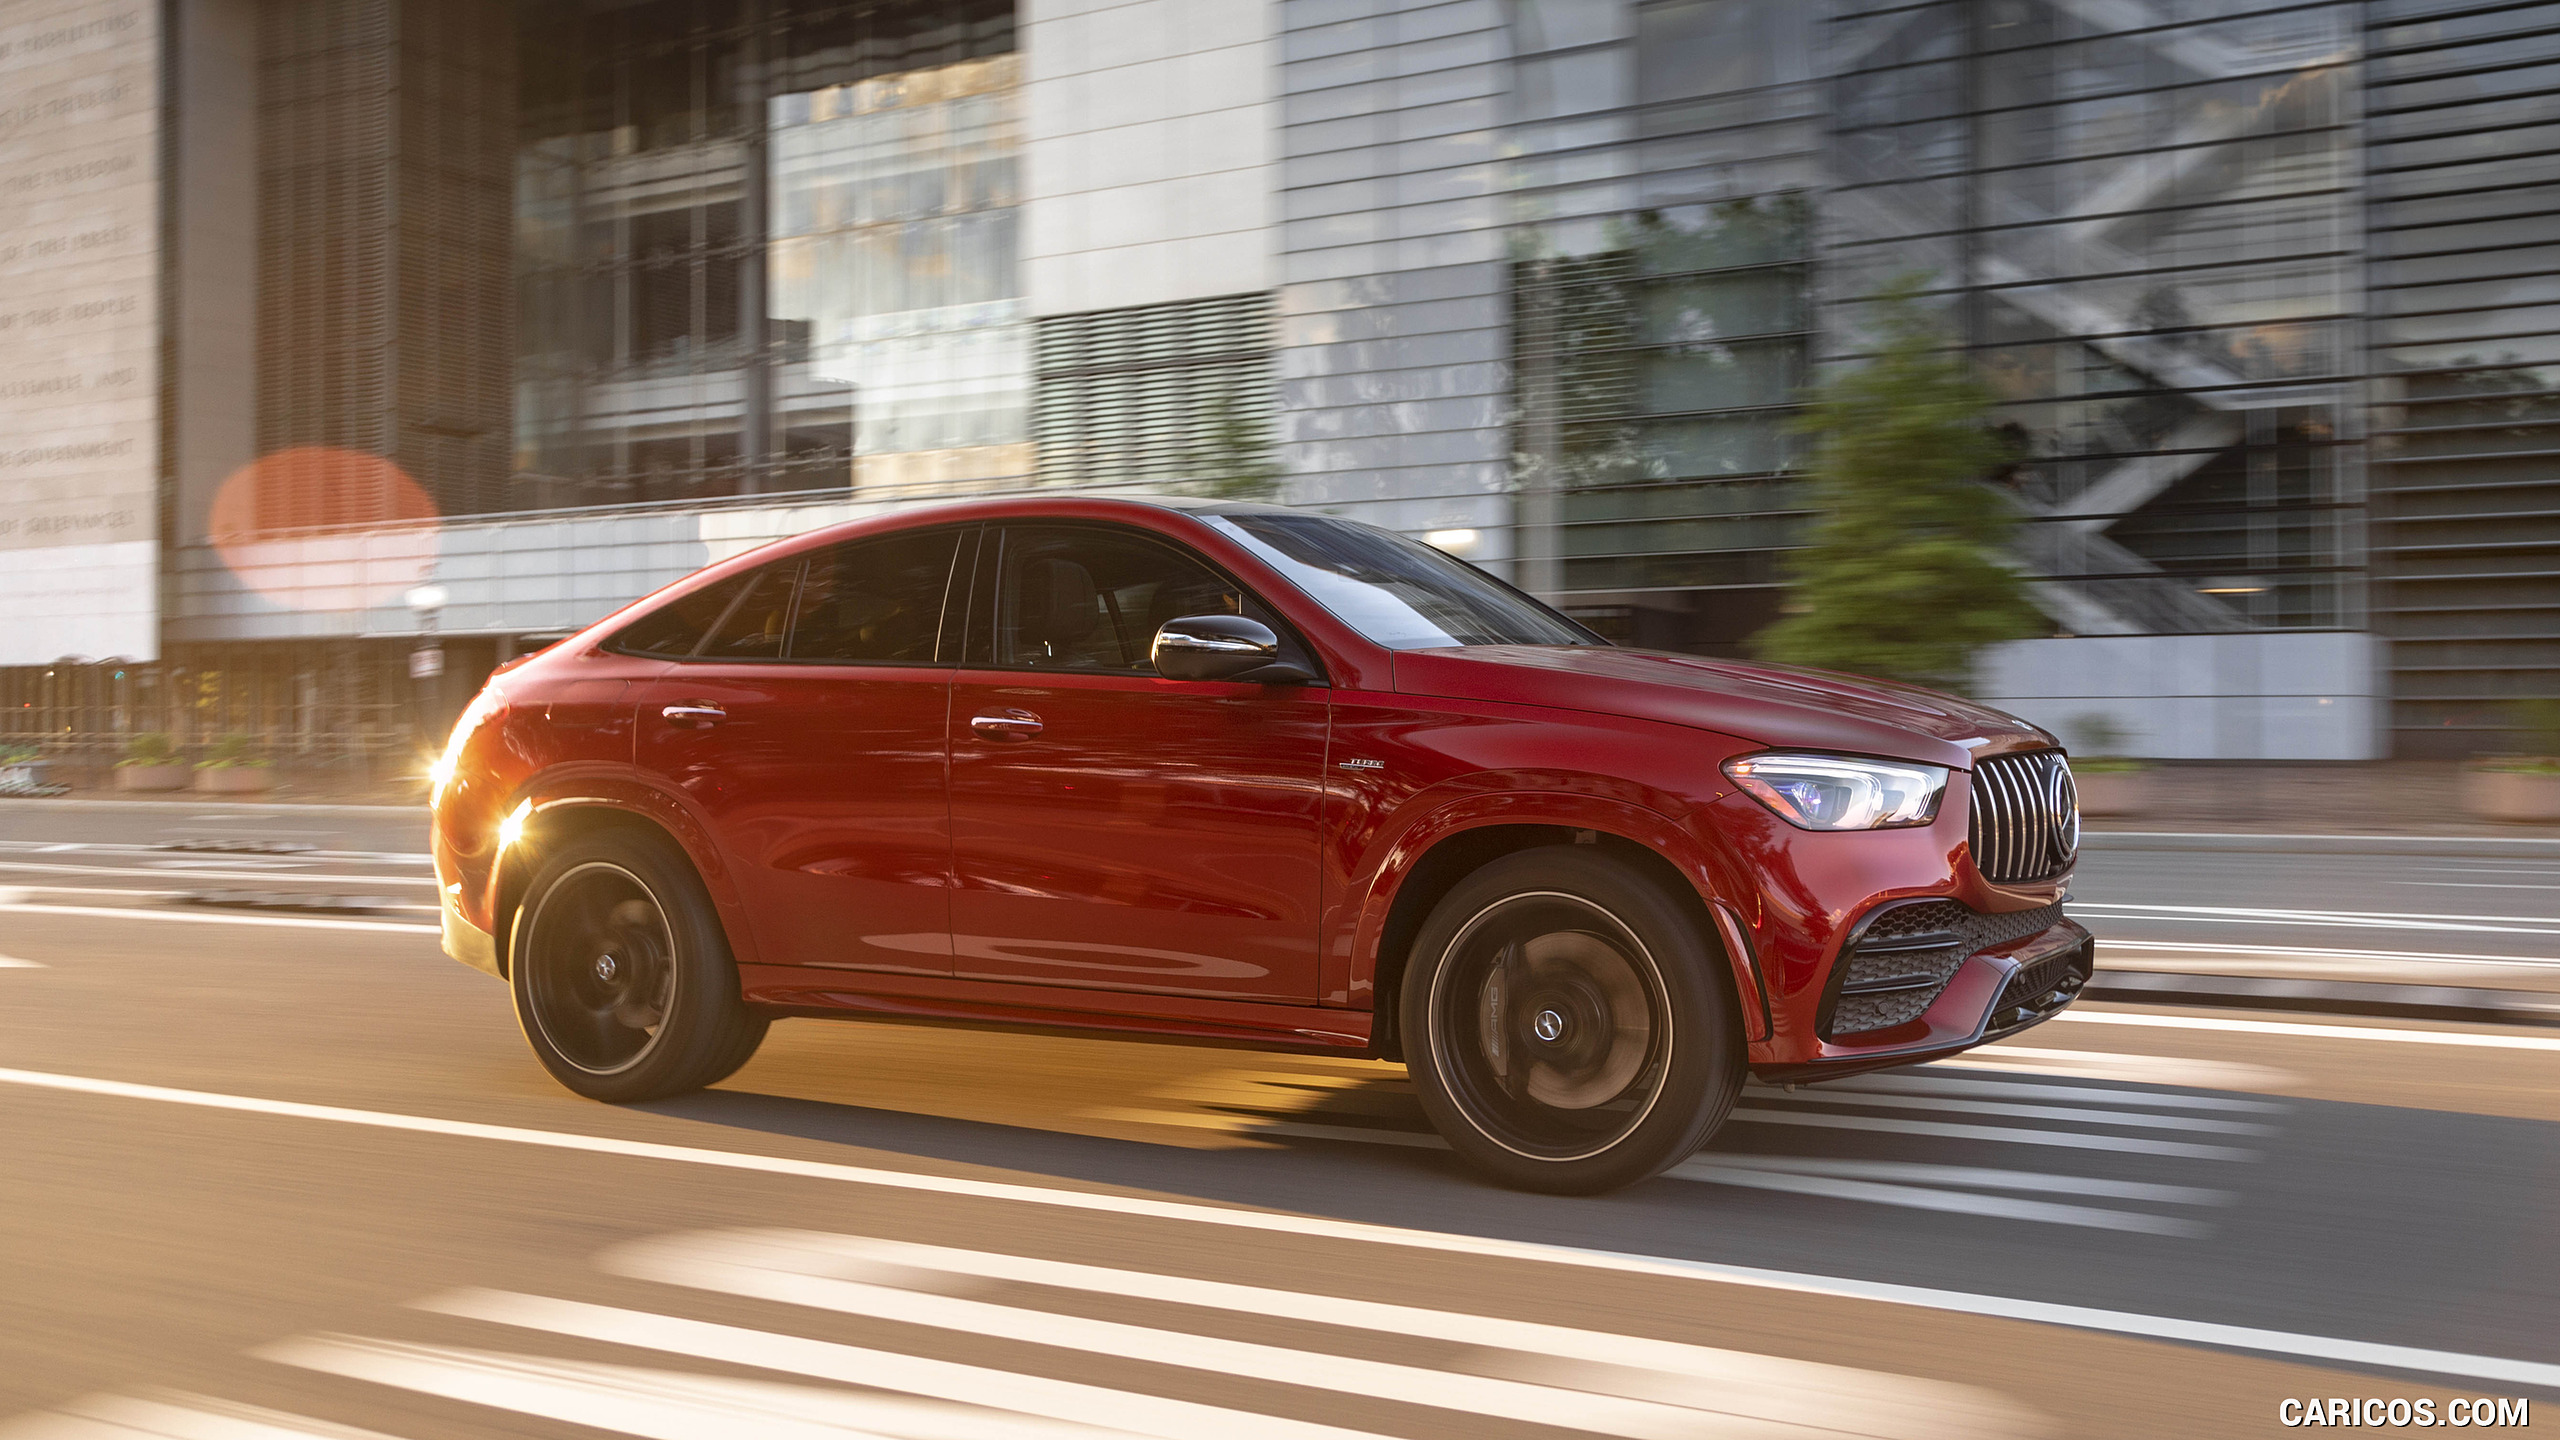 2021 Mercedes-AMG GLE 53 Coupe - Front Three-Quarter, #121 of 178